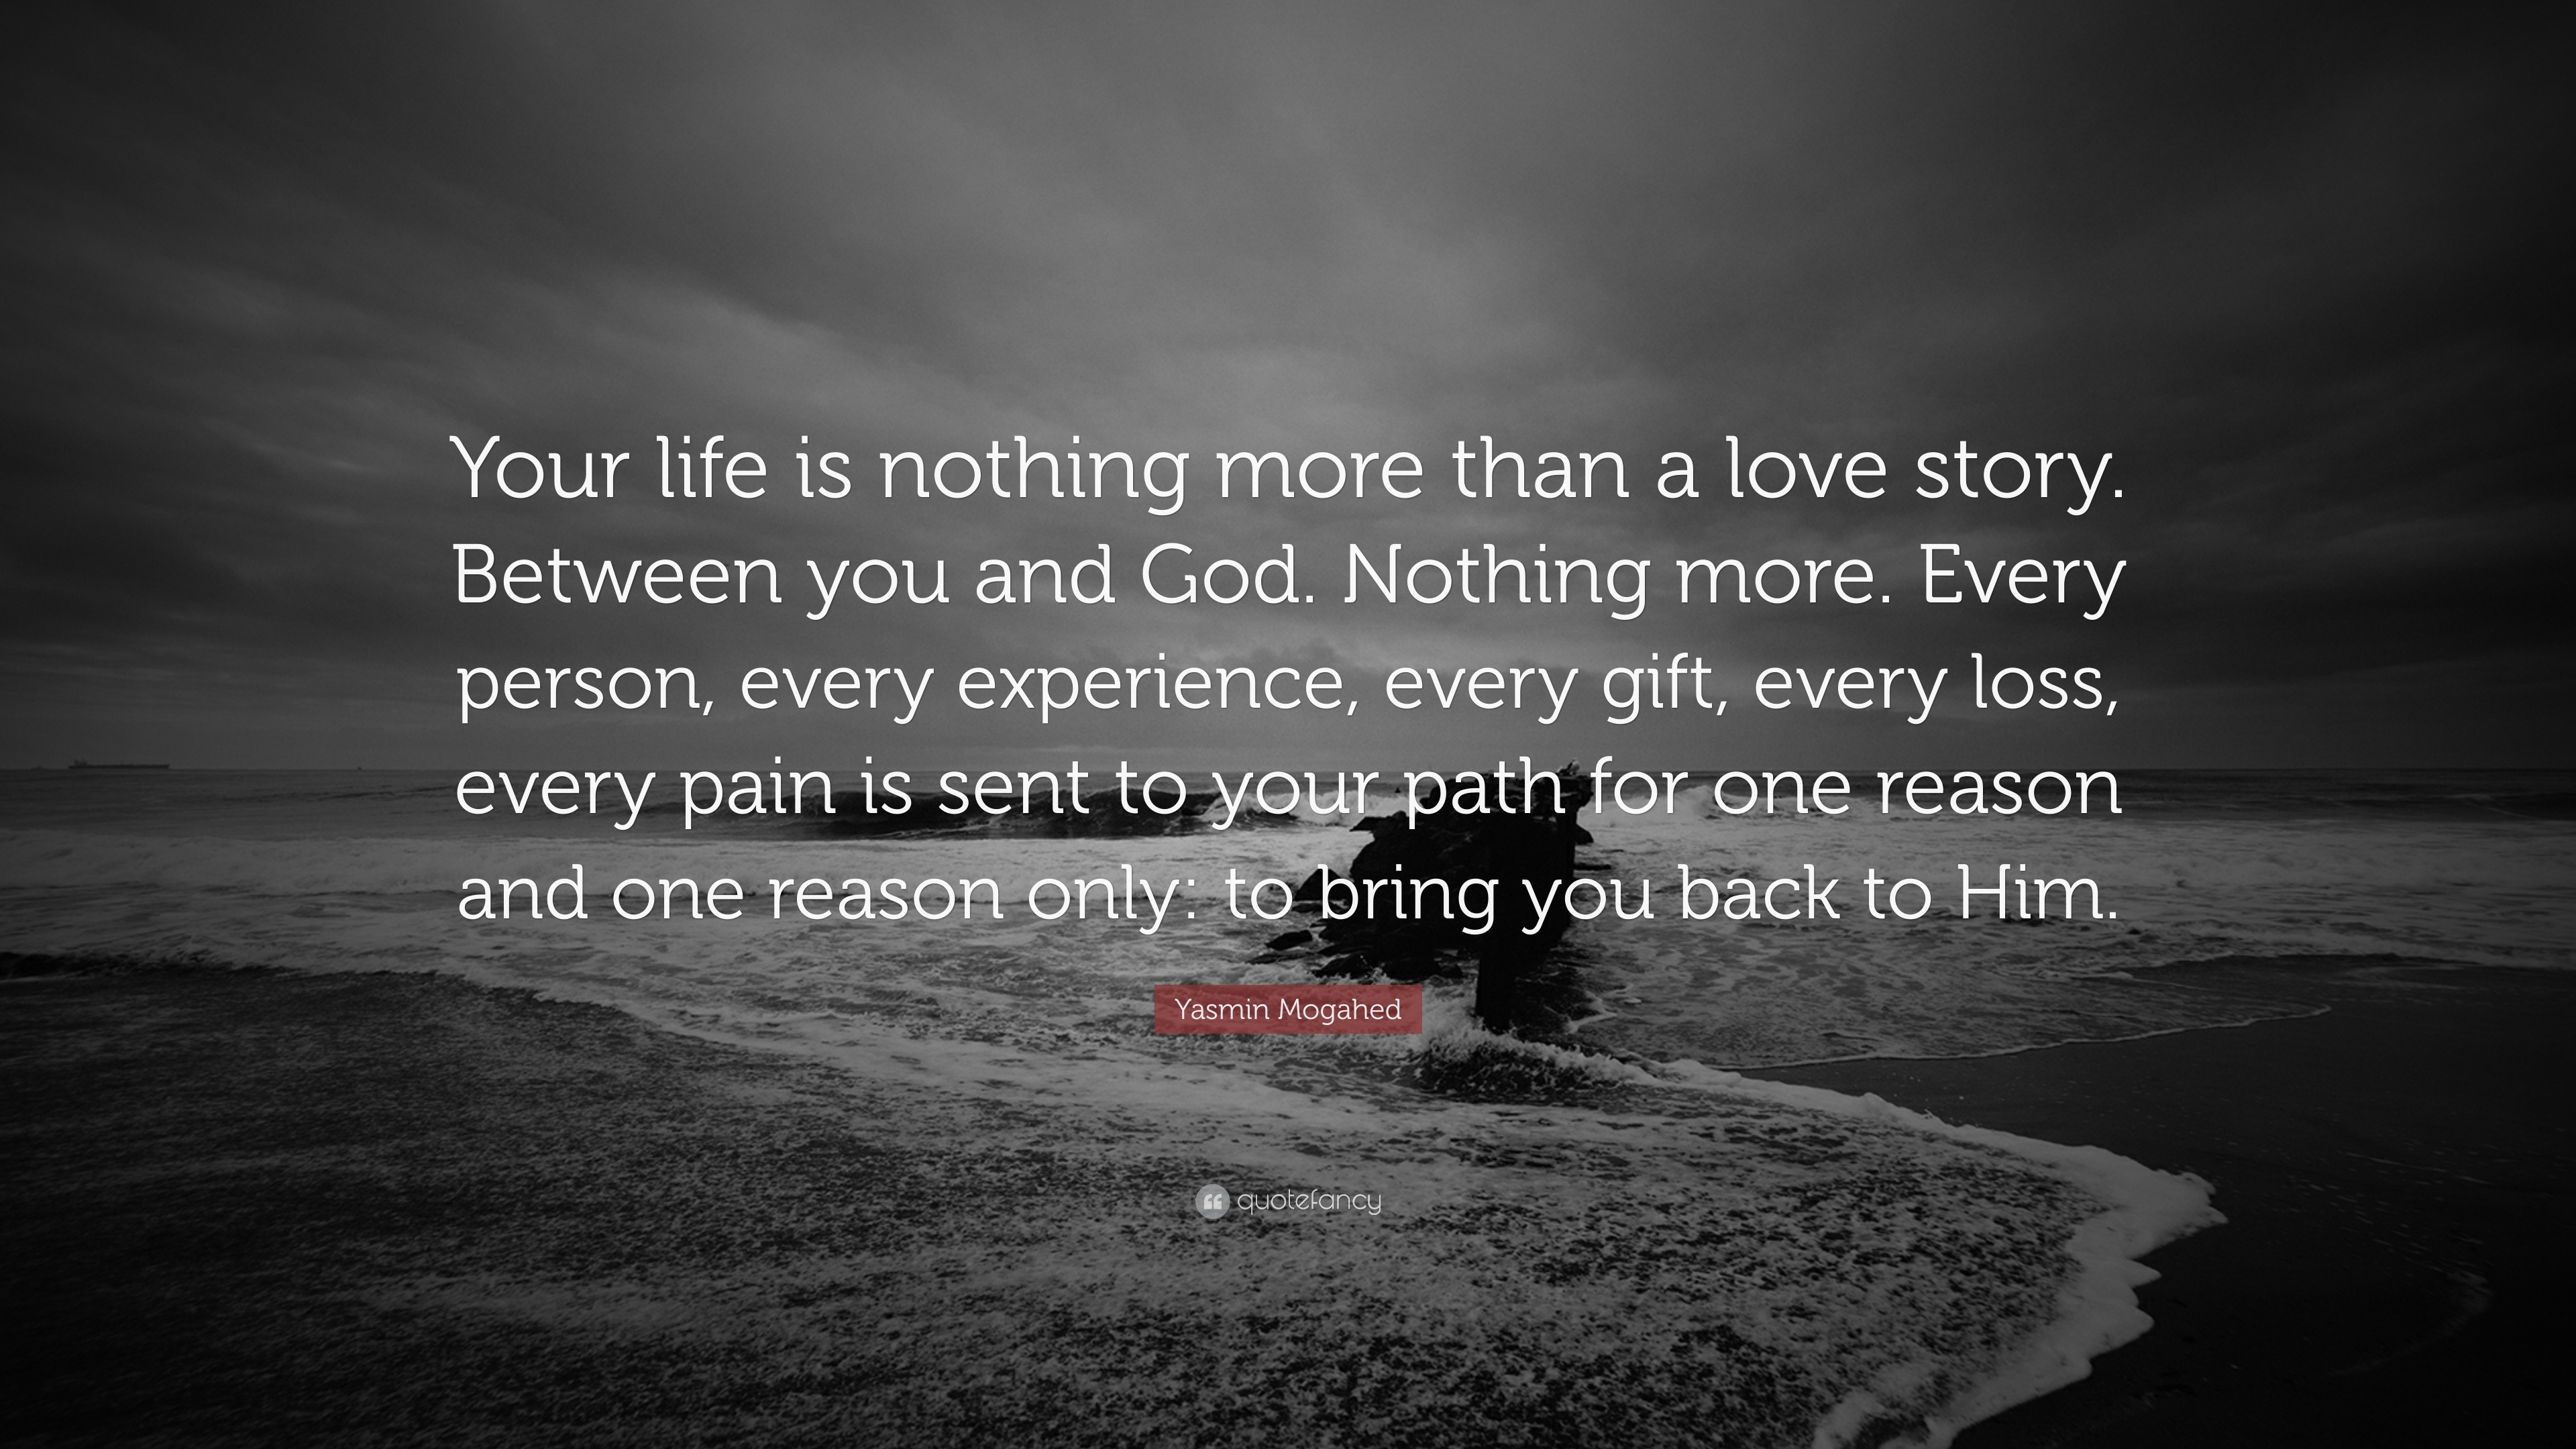 Yasmin Mogahed Quote “Your life is nothing more than a love story Between